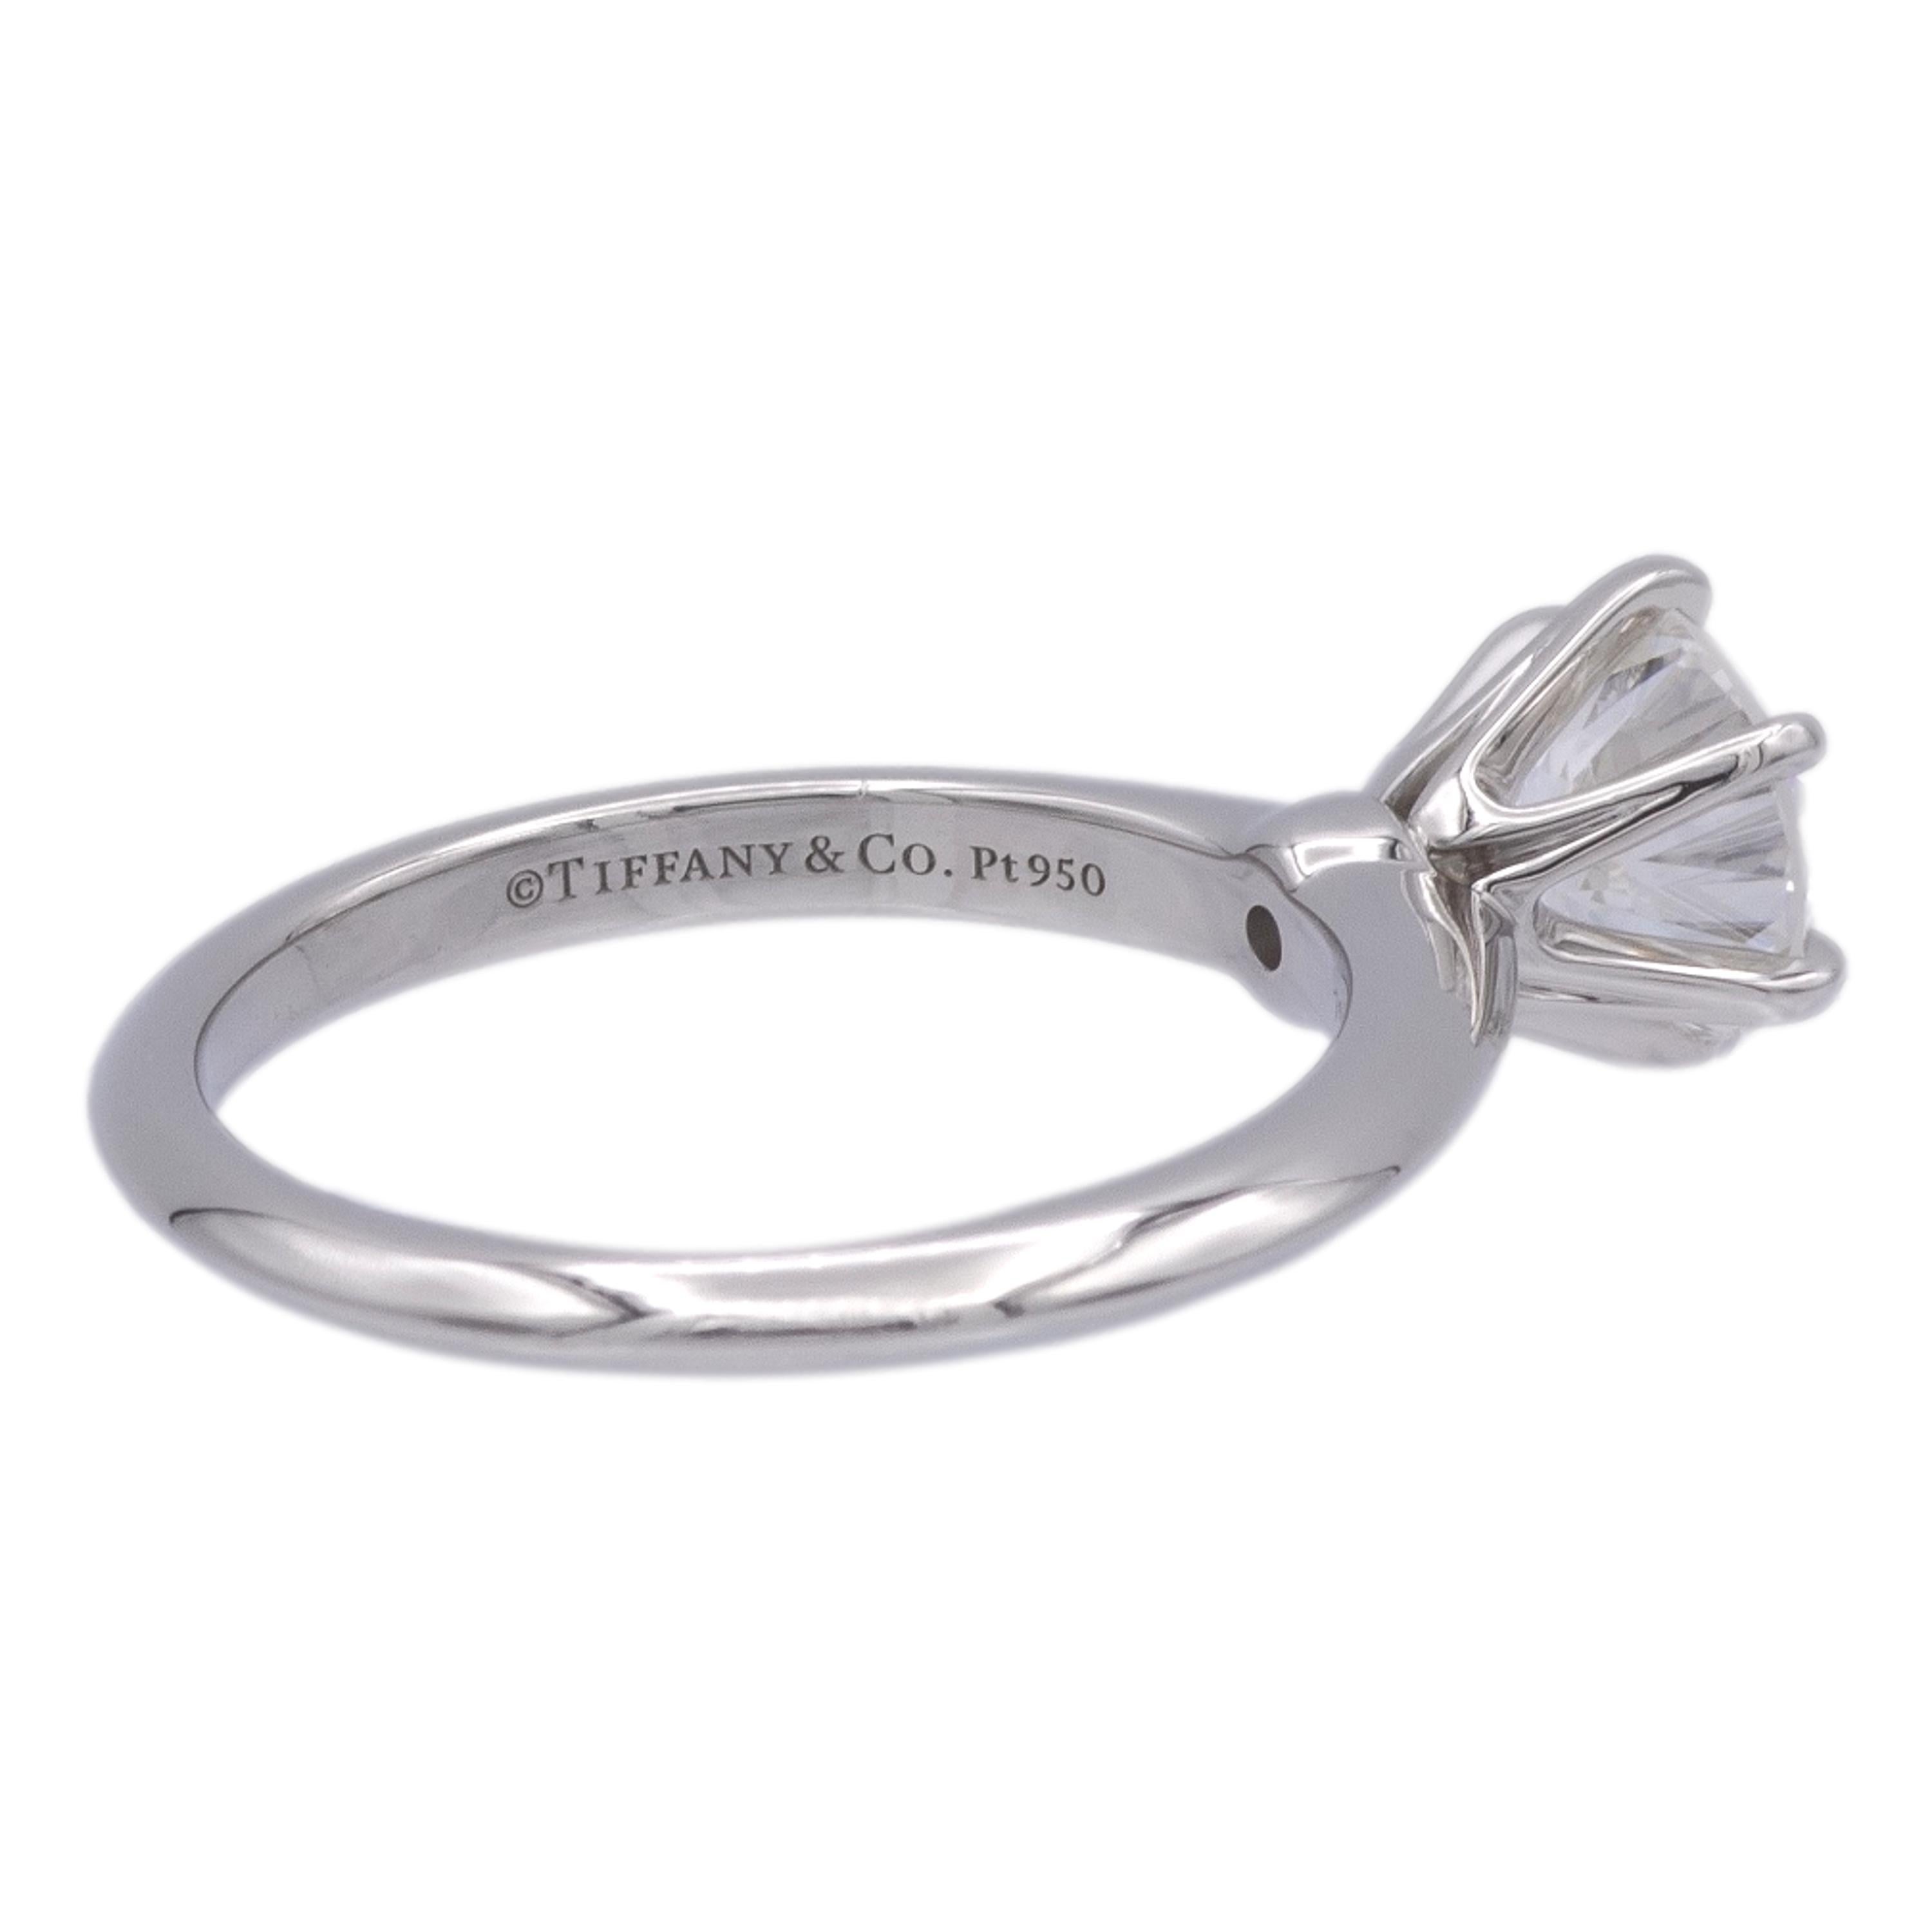 Tiffany & Co. Solitaire Diamond Engagement ring finely crafted in a six prong platinum mounting featuring a 1.31 ct round brilliant diamond center graded G color and VVS2 Clarity. The diamond is inscribed with Tiffanys serial numbers and